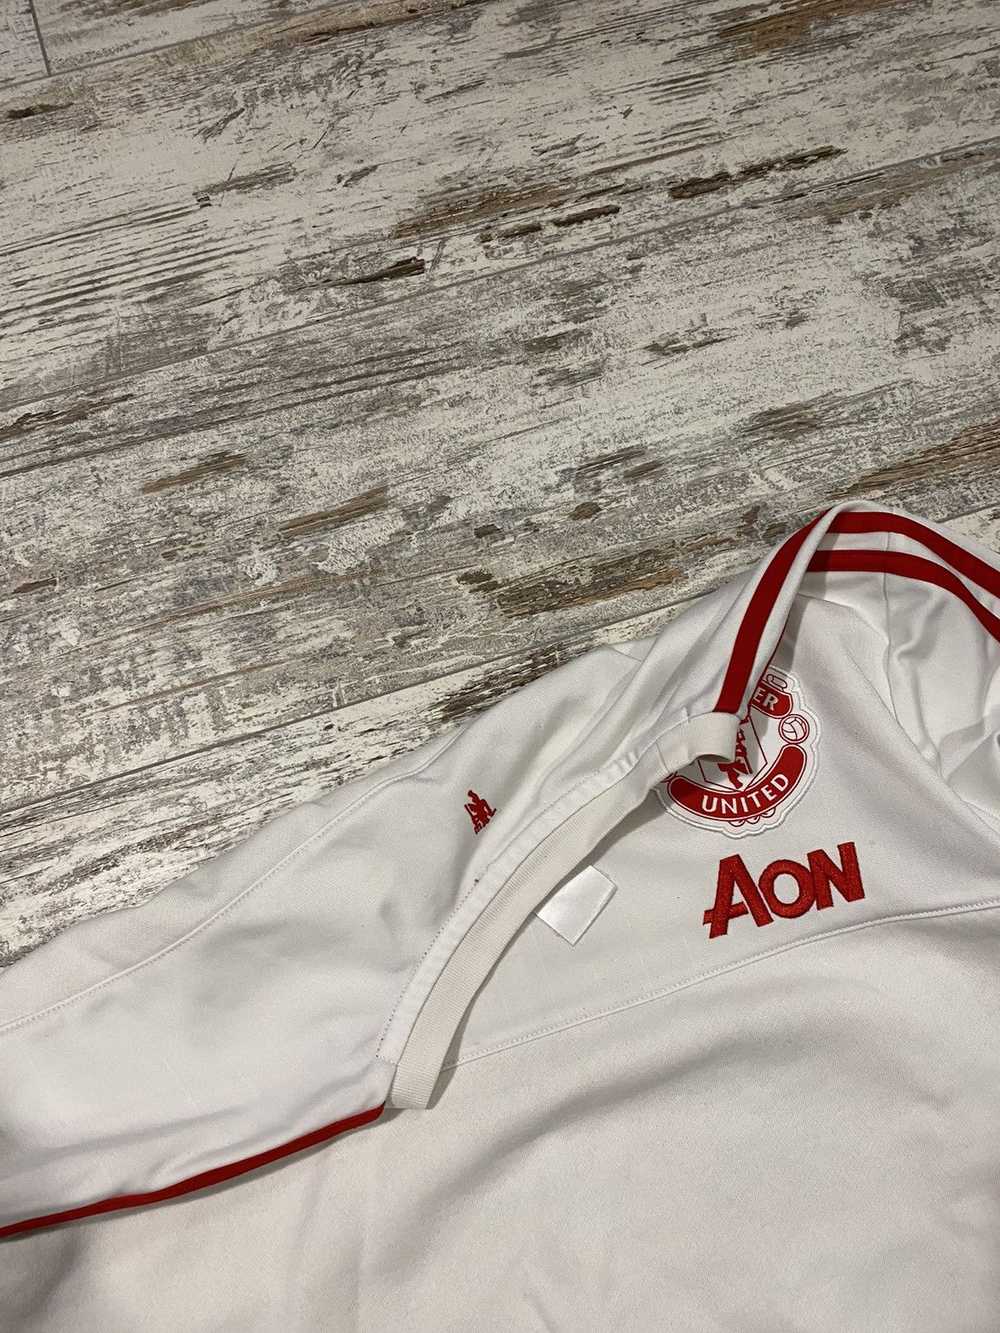 Adidas × Manchester United × Soccer Jersey VINTAG… - image 8